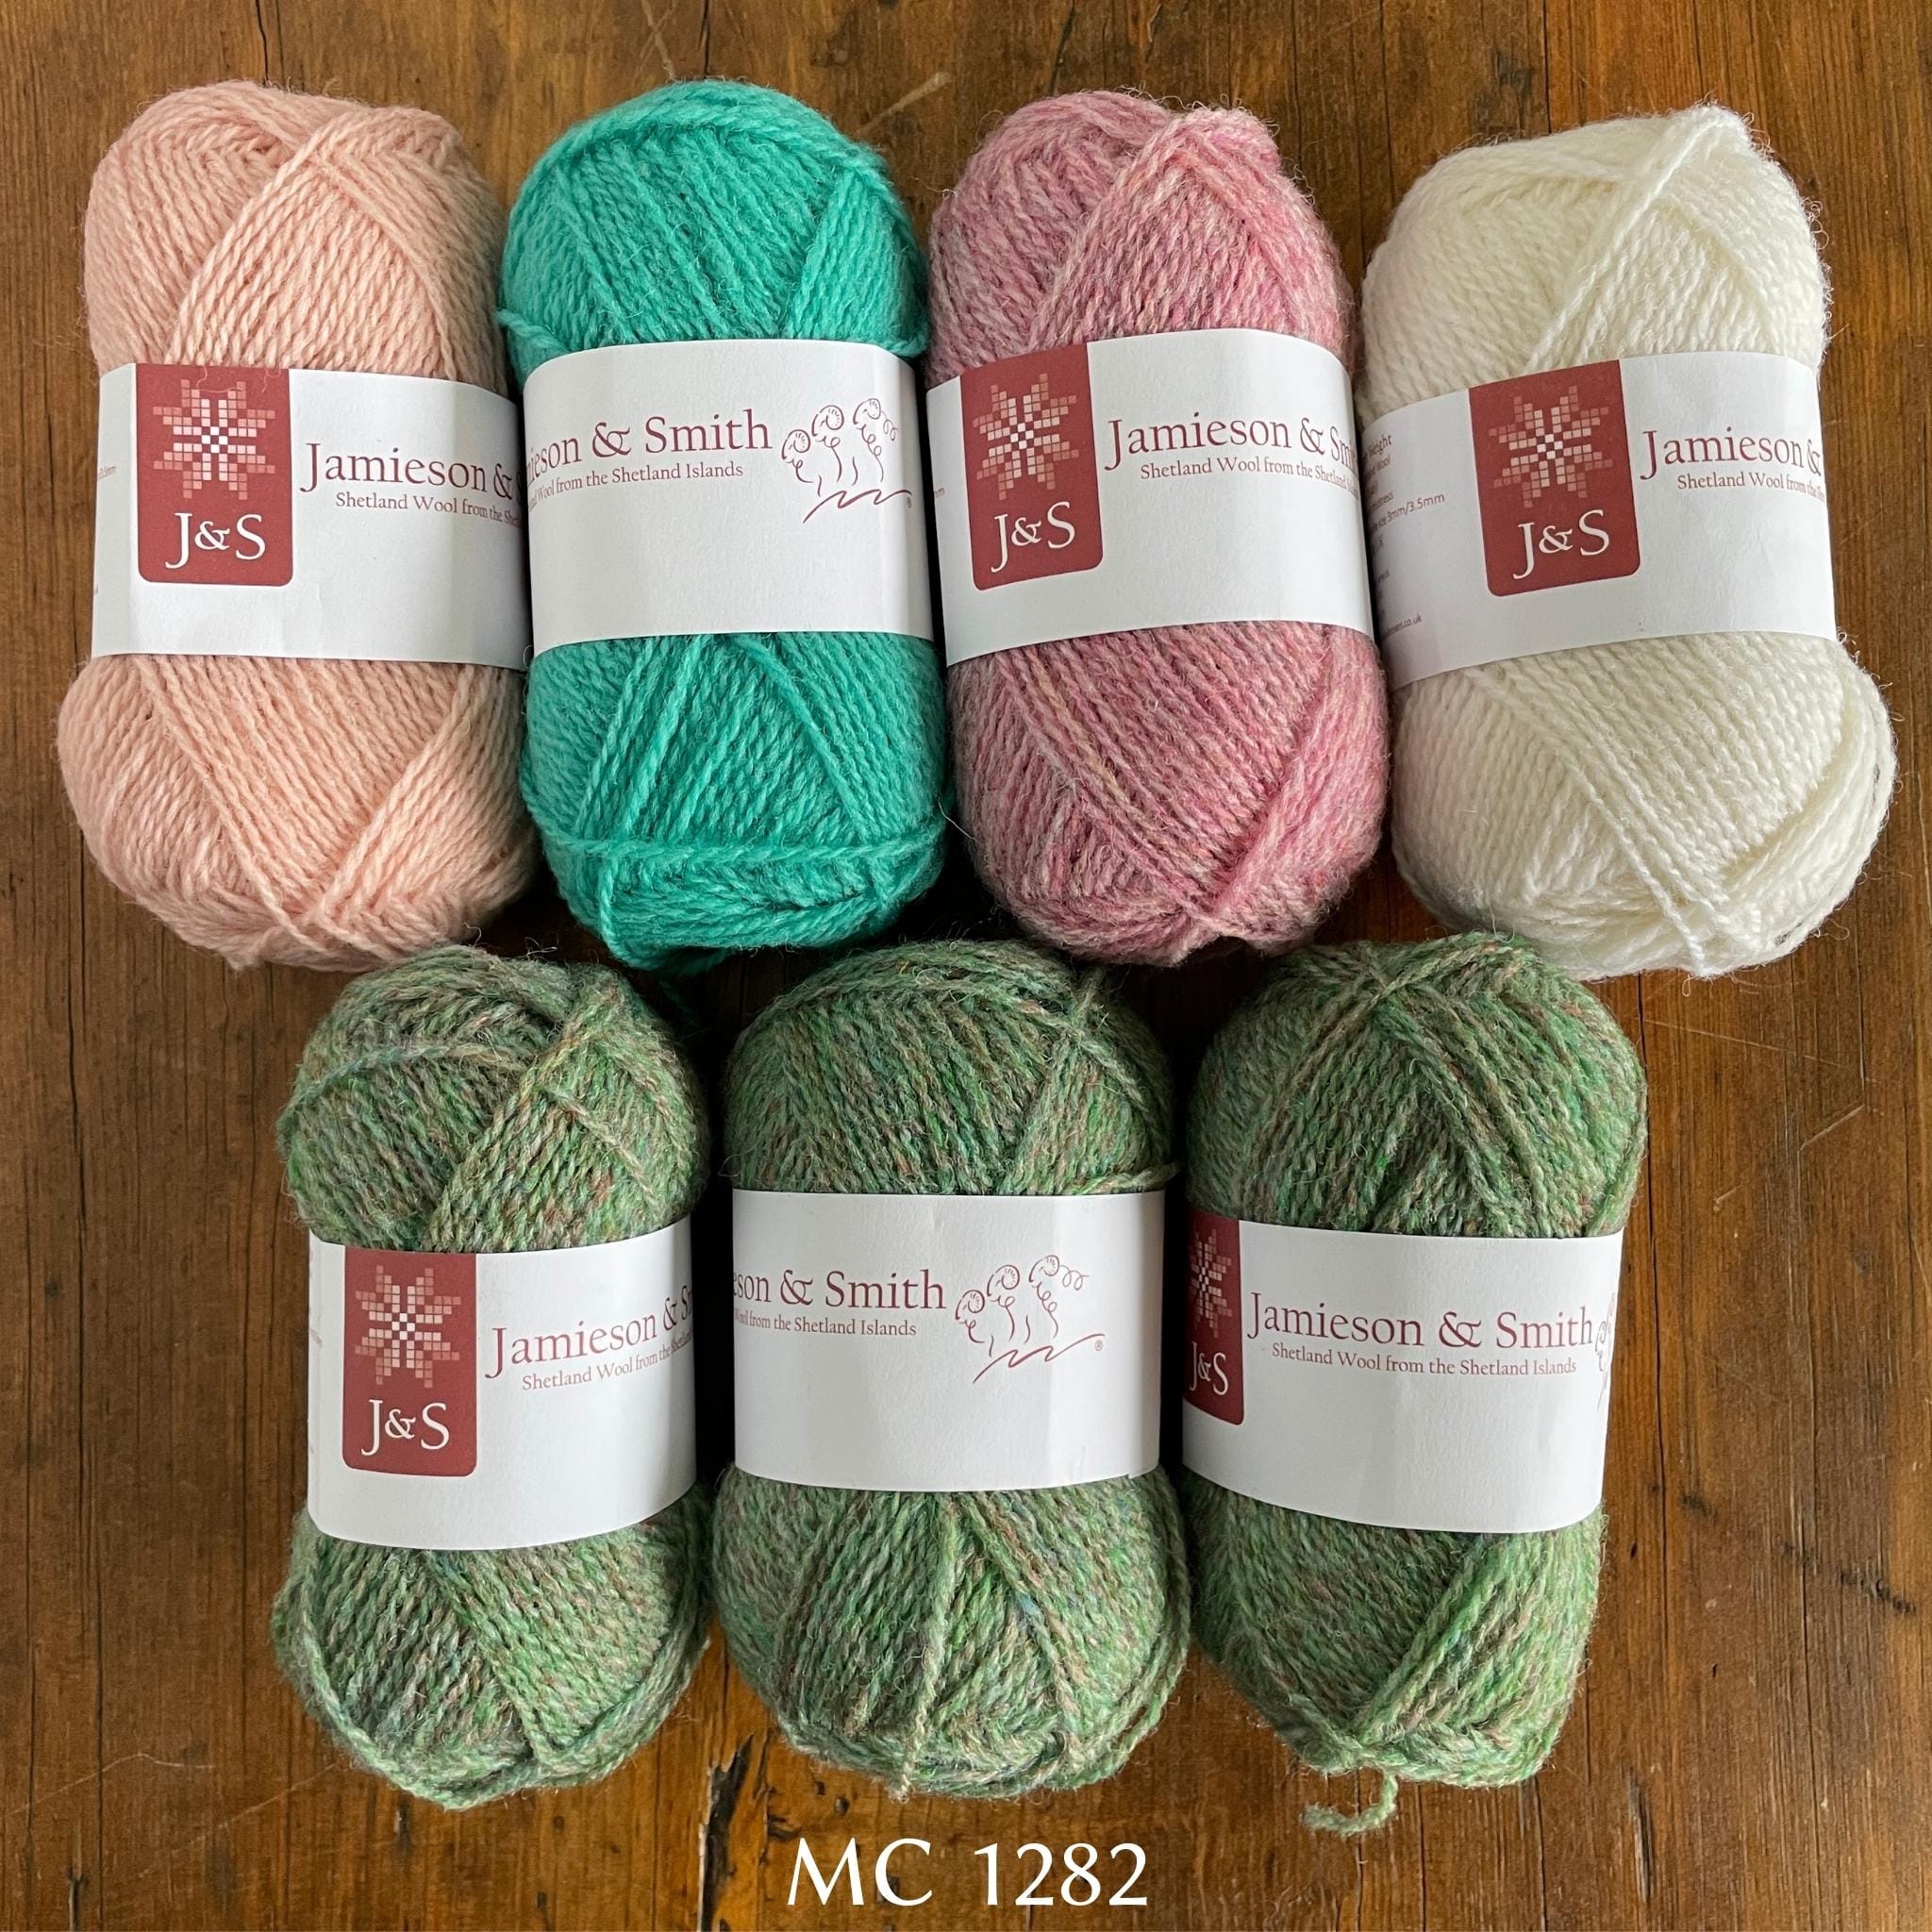 7 balls of J&S yarn in heathered green and pink, light turquoise, and white